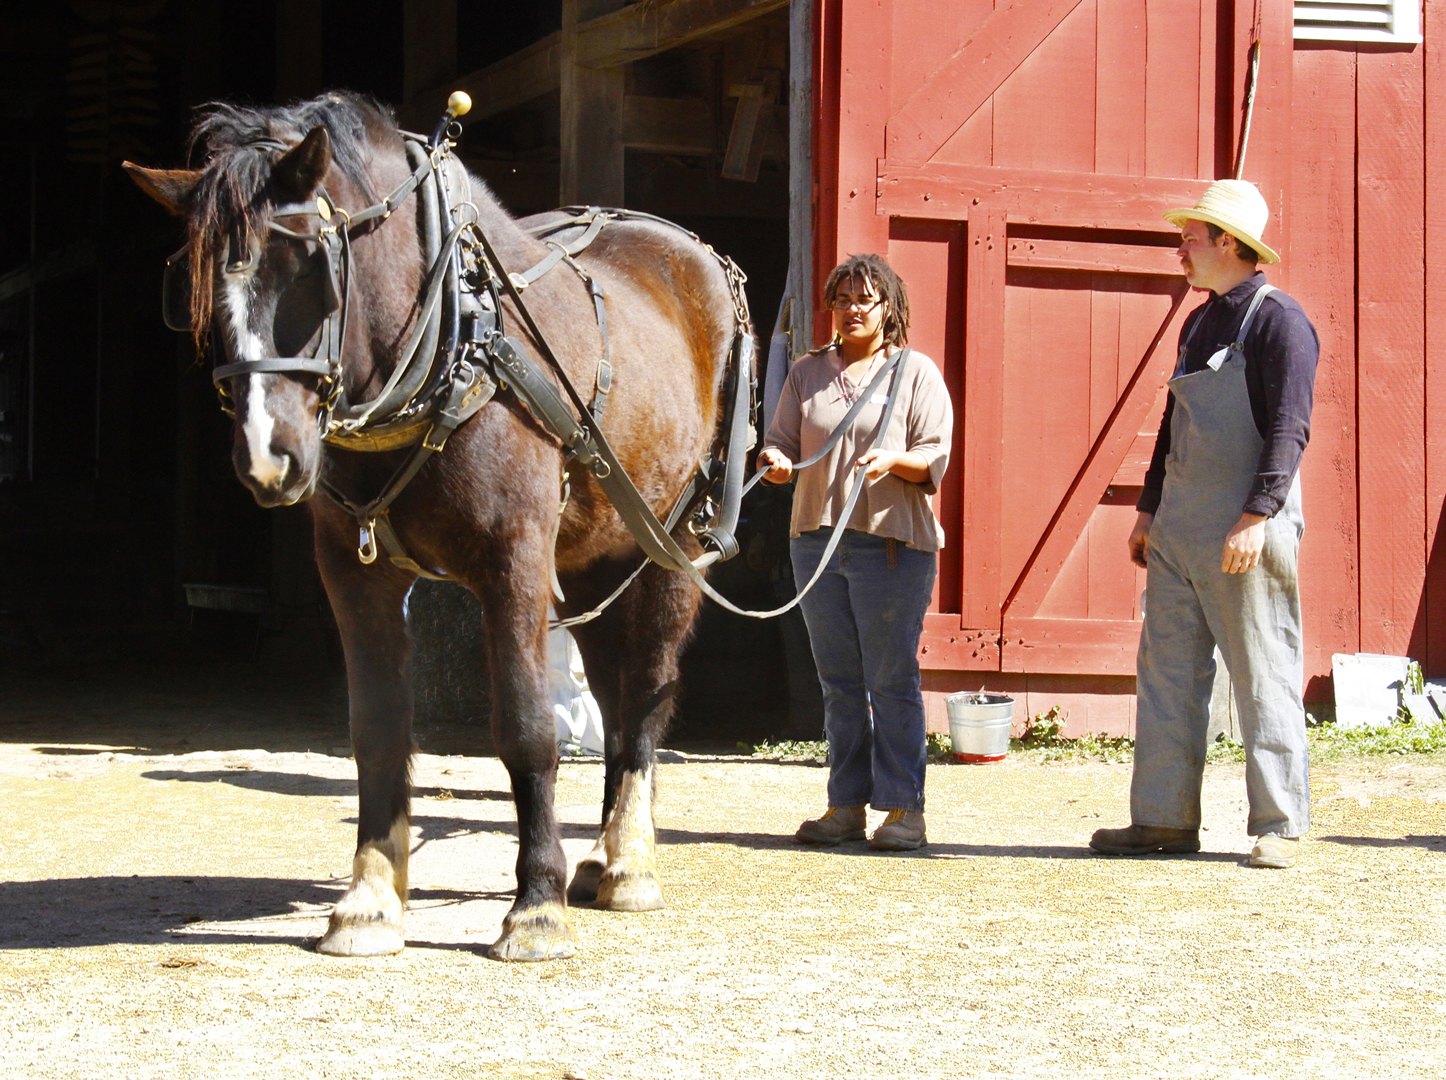 Visitor drives one of the Percheron horses during a program at Slate Run Living Historical Farm